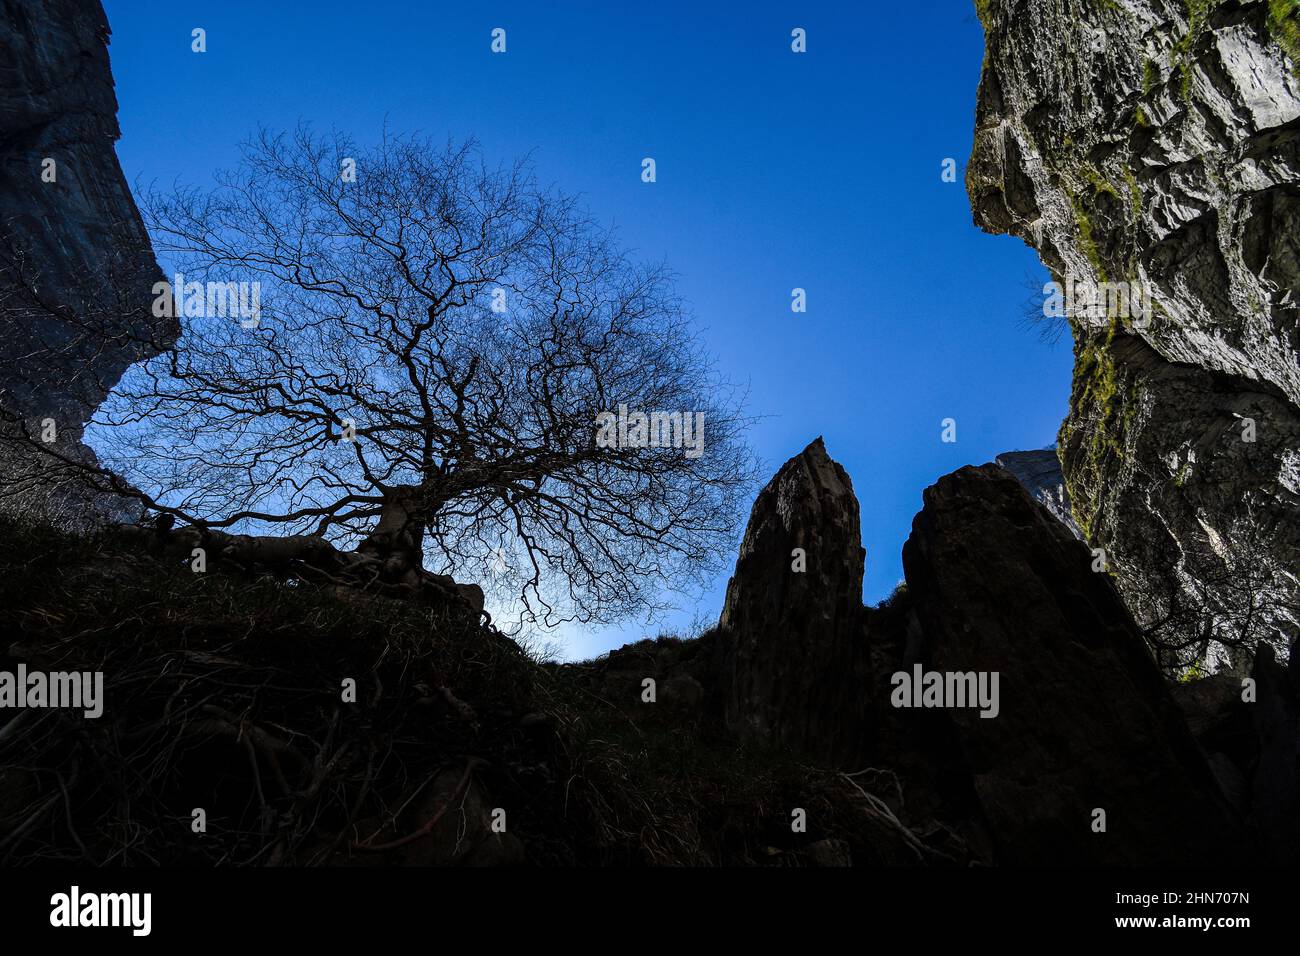 Silhouette of a tree without leaves among the rocks of Delika Stock Photo